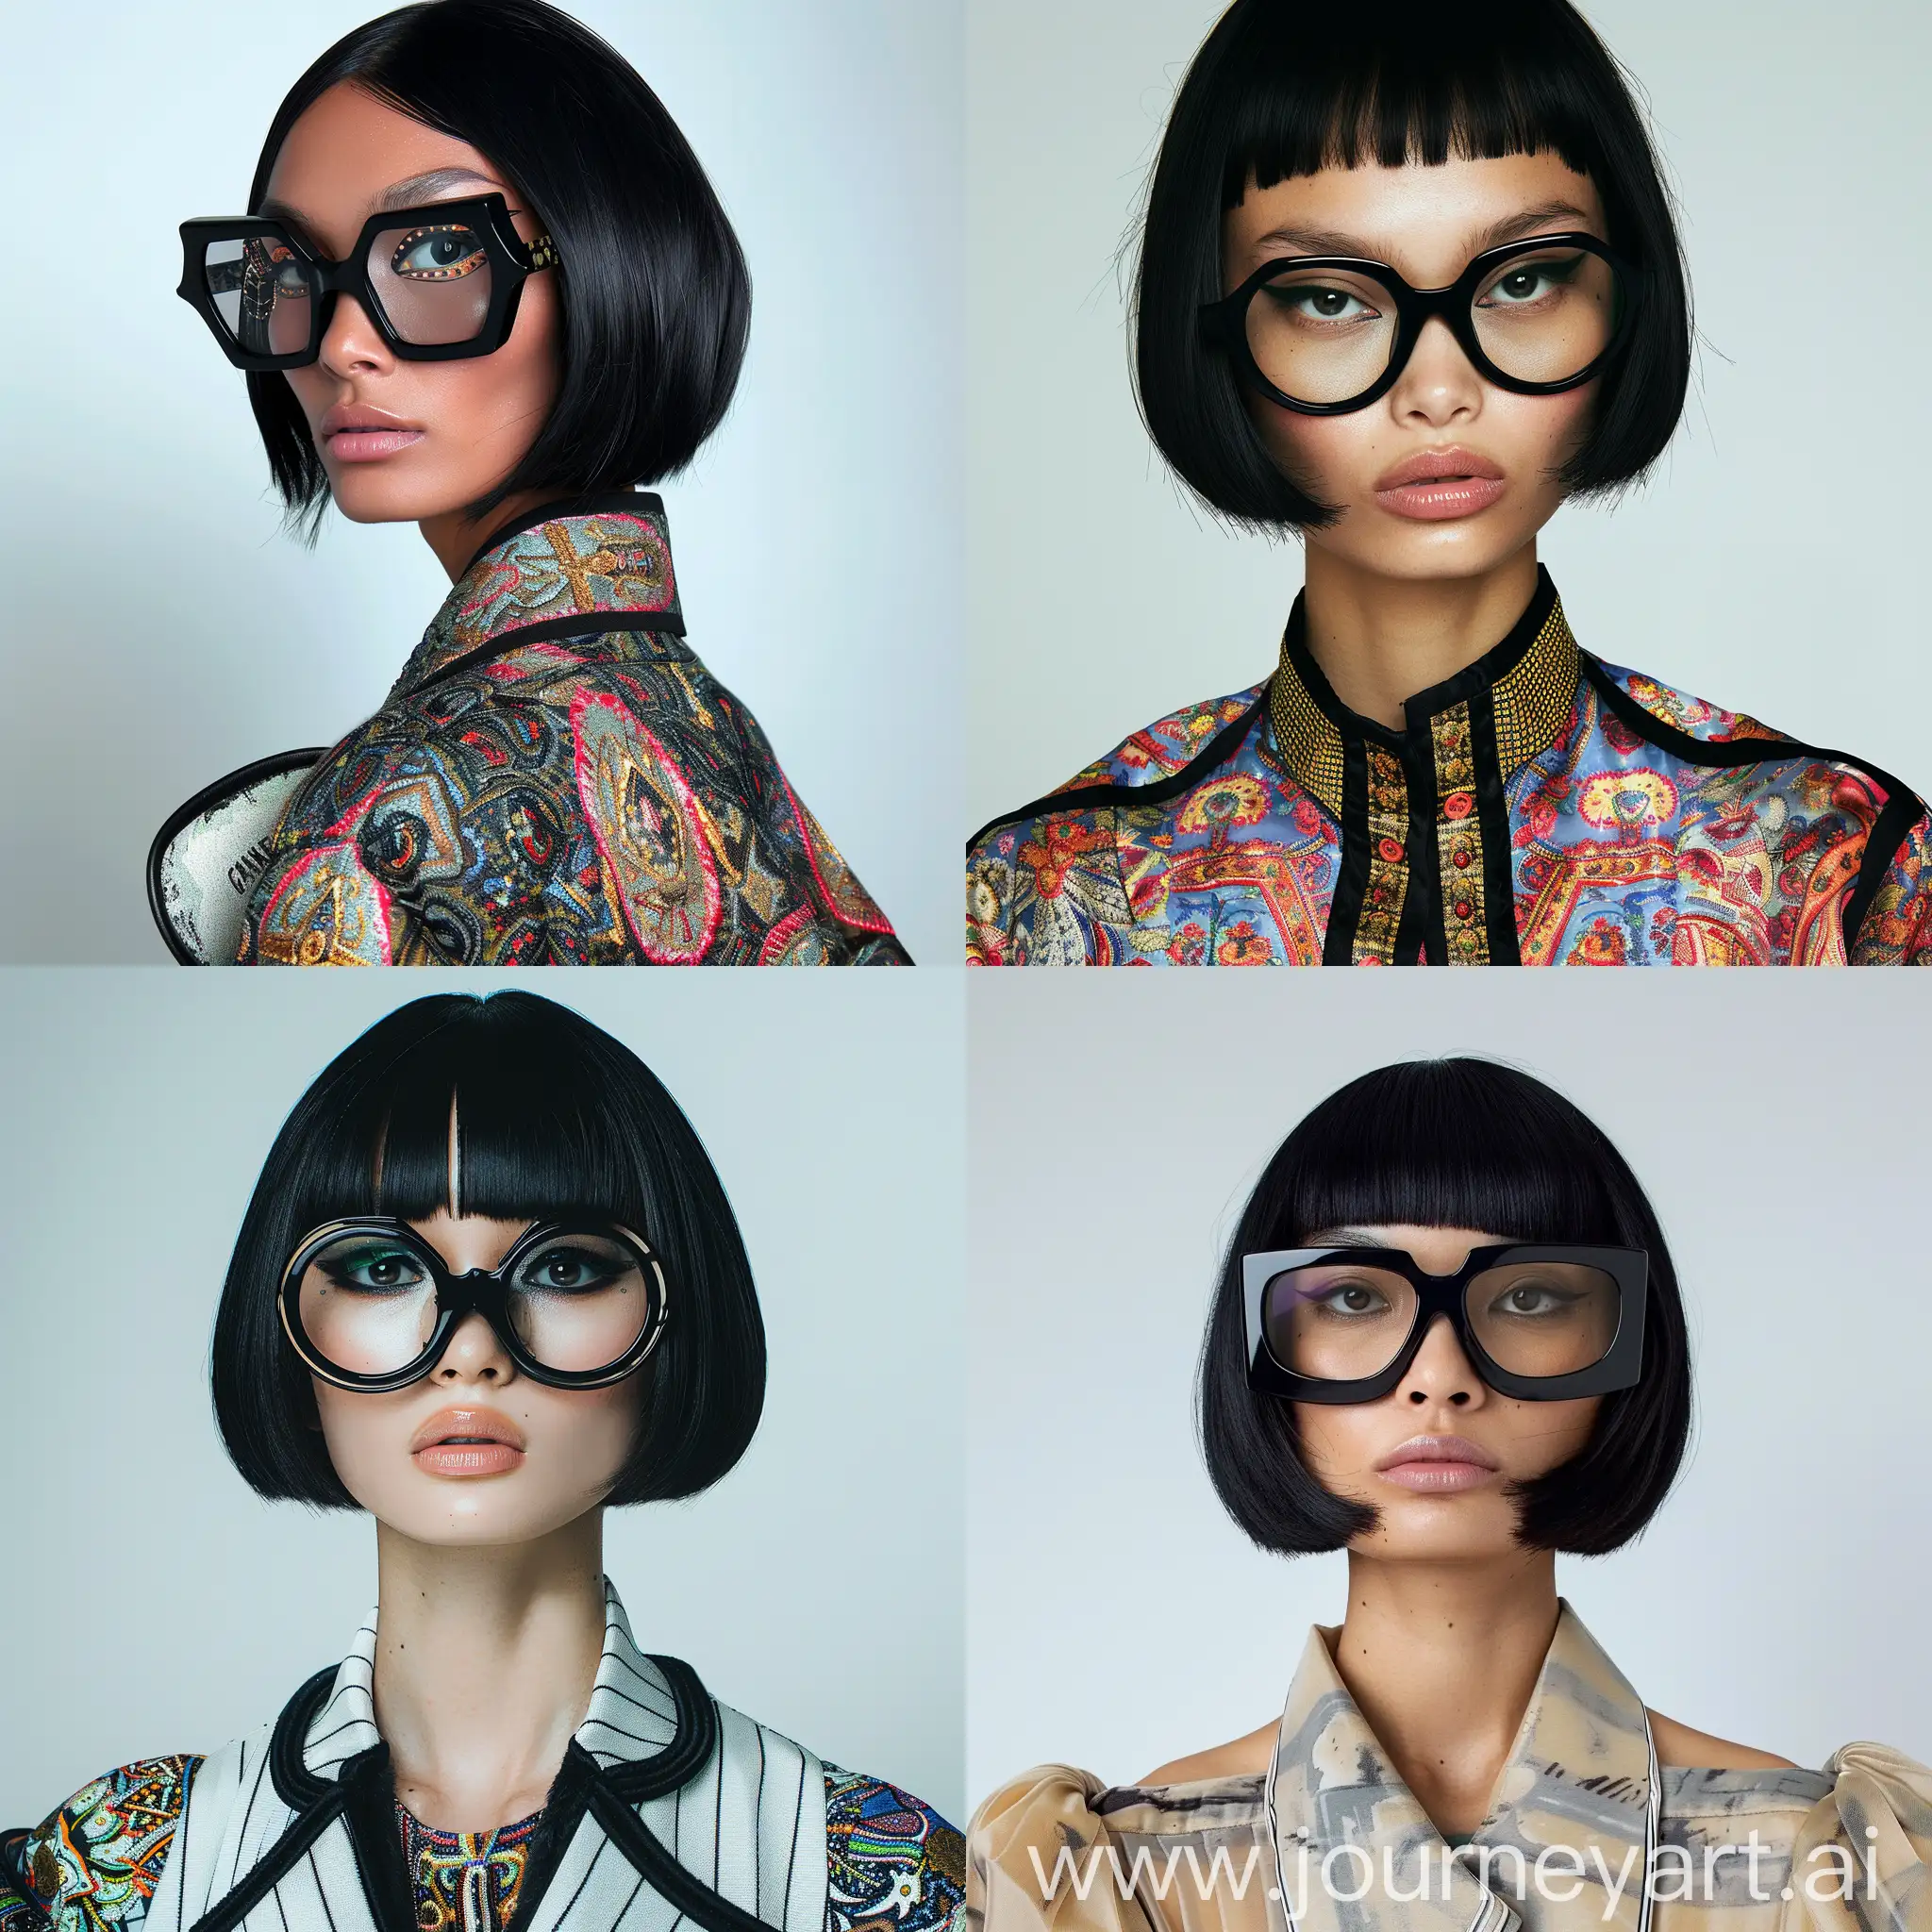 Trendy-Eastern-Model-in-High-Fashion-Paris-Outfit-with-Black-Glasses-on-White-Studio-Background